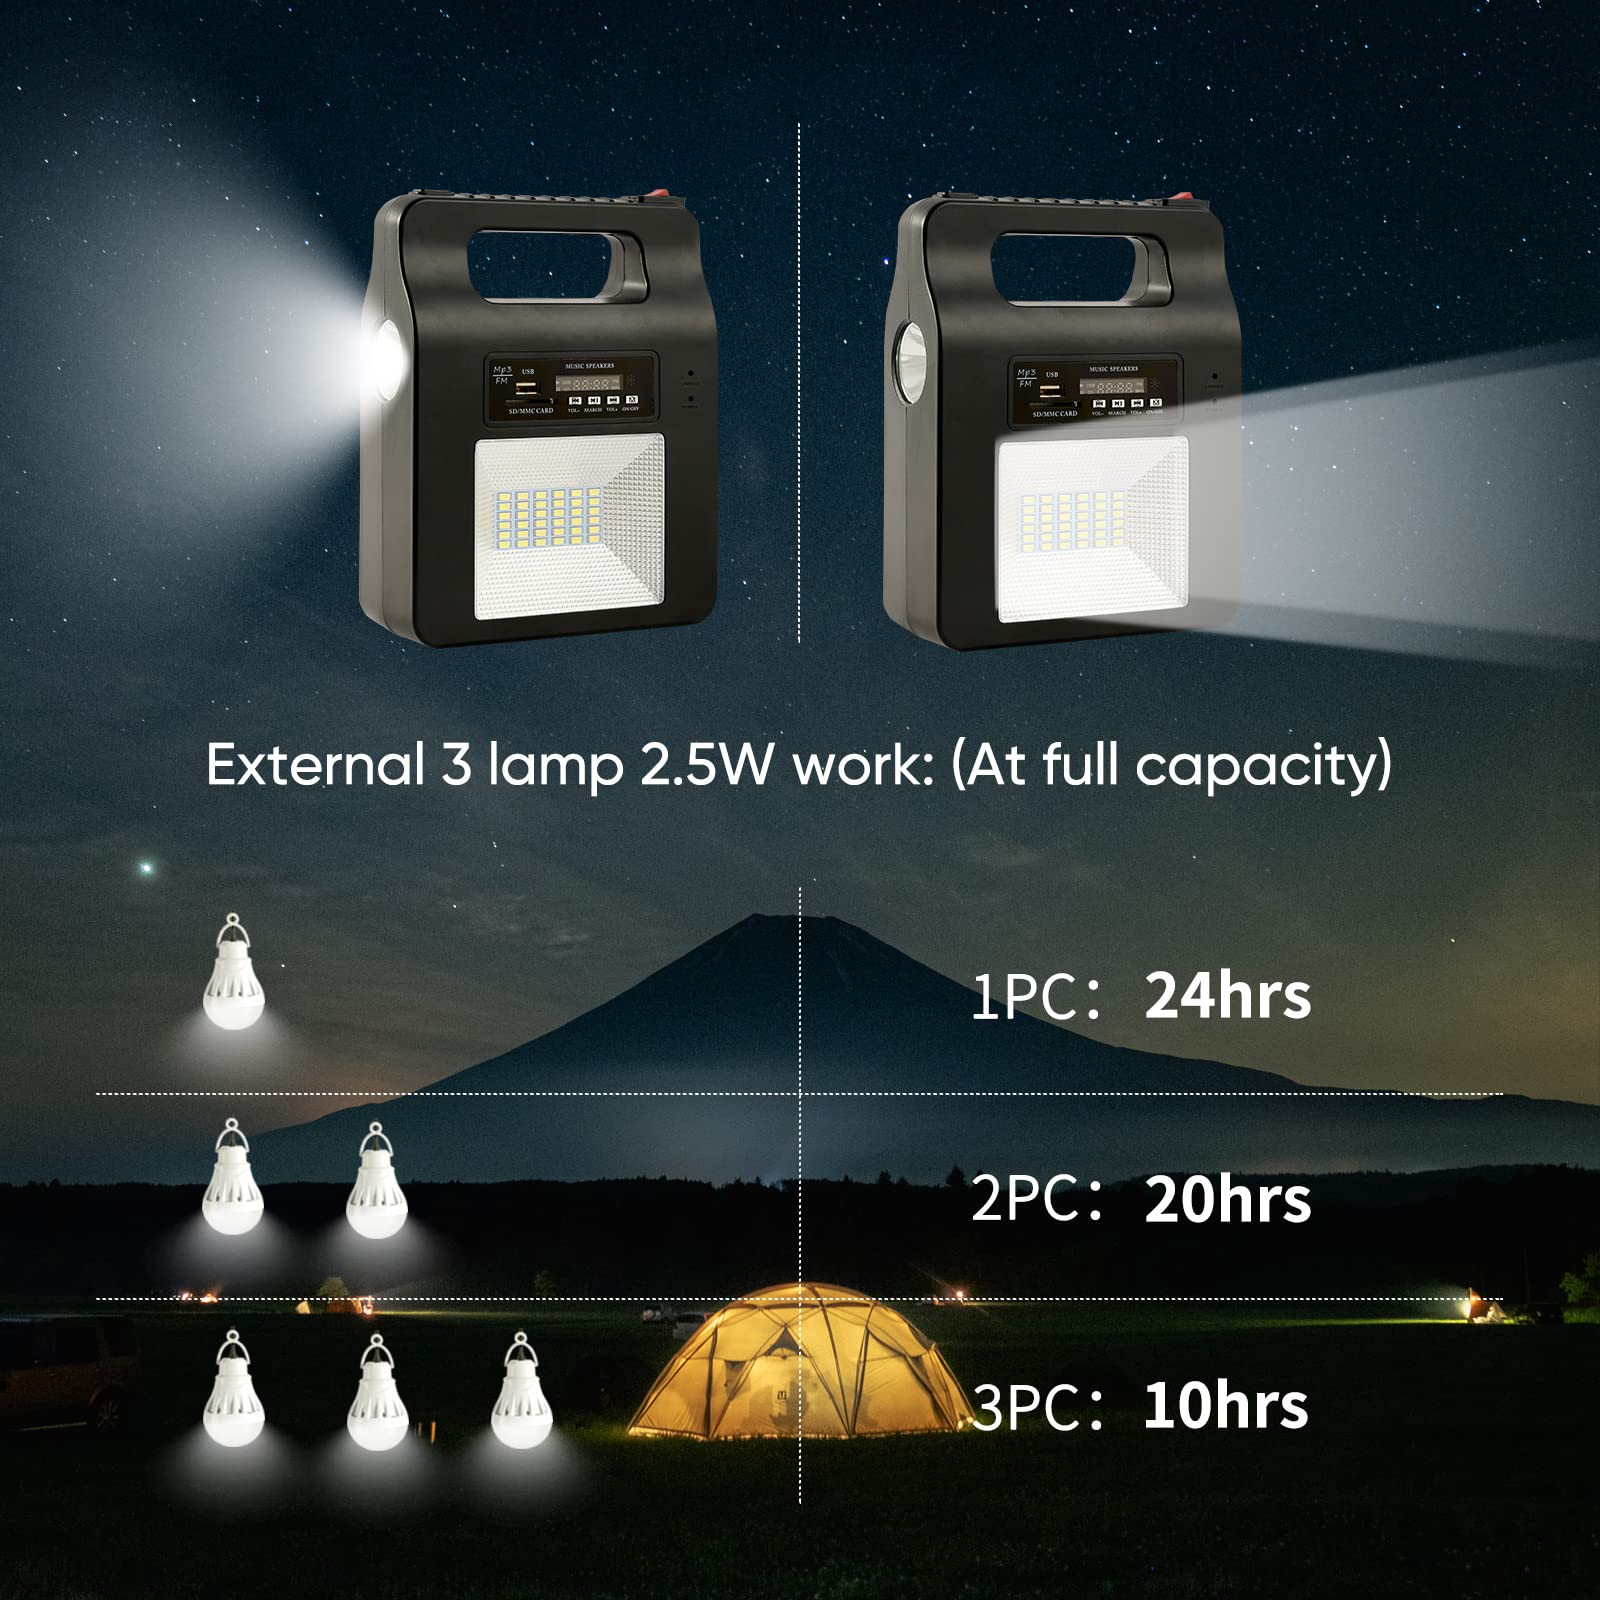 Solar Generator with Panels Included, Portable Power Generators Station 12000mAh with 3 LED Lamps, Emergency Solar Powered Generator for Home Use Camping Emergency Power Supply